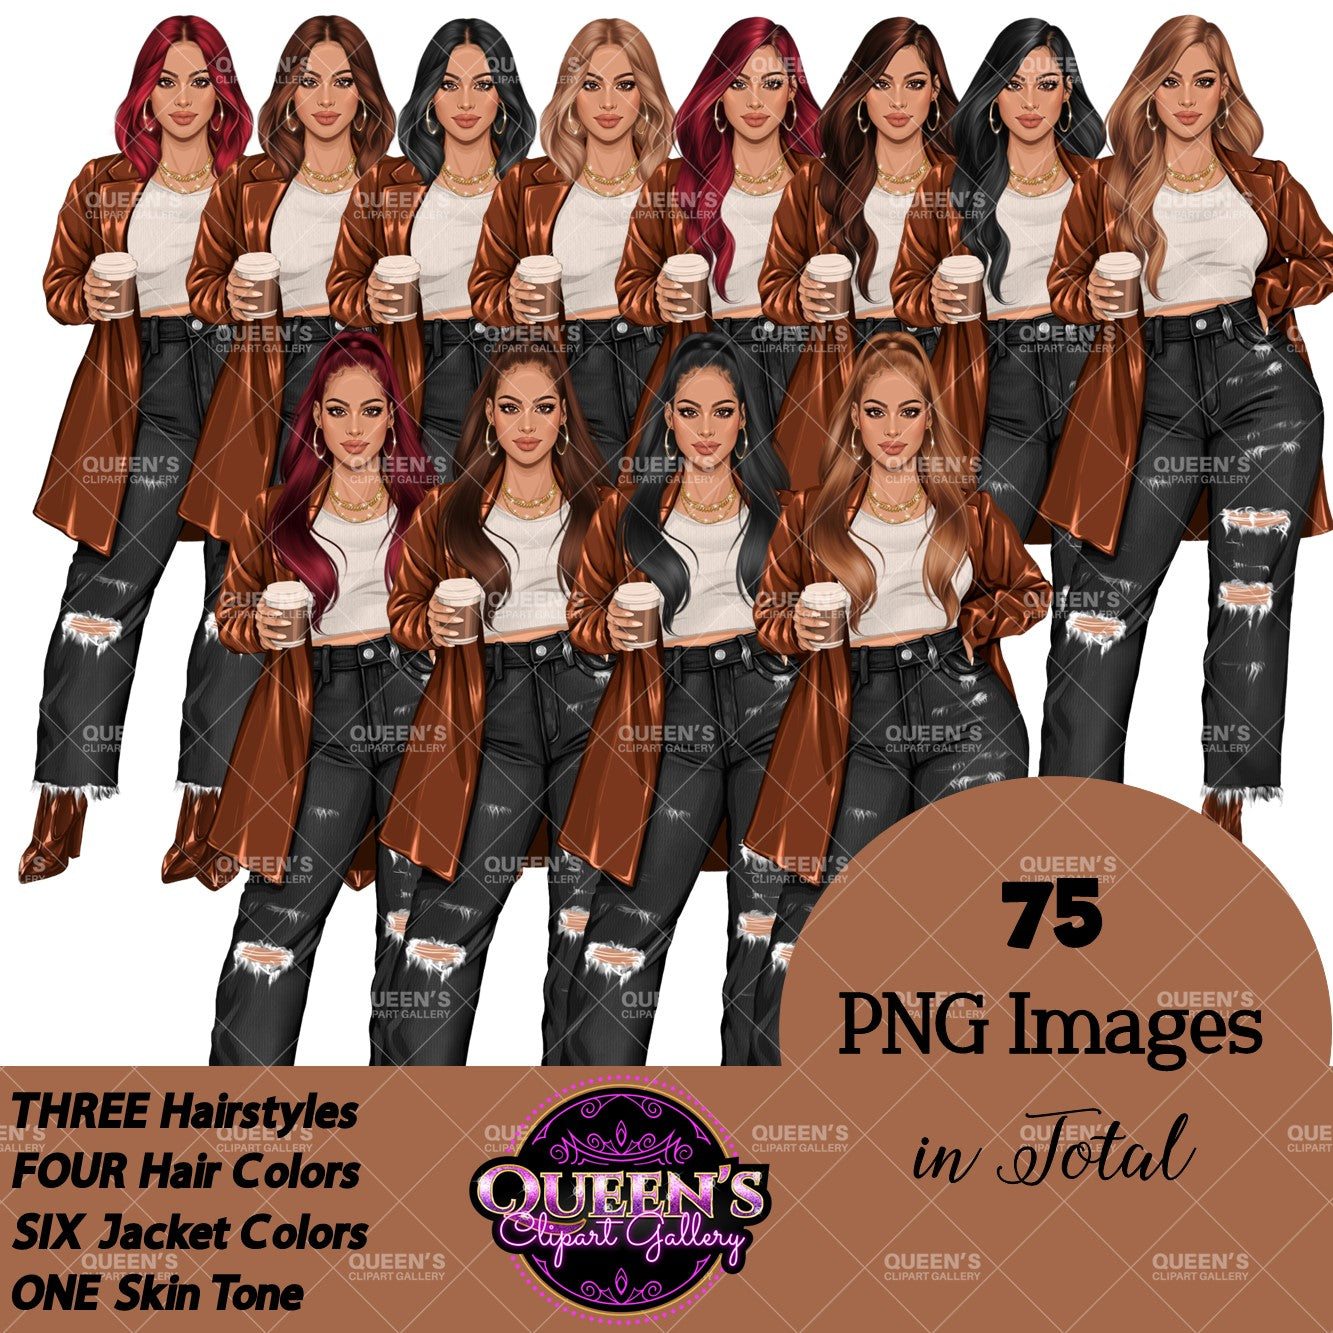 Coffee Girl Clipart, Denim Jeans Girl, Jeans Girl, Lady Boss Clipart, Fashion Girl Clipart, Jeans Girl Clipart, Woman in Leather Jacket